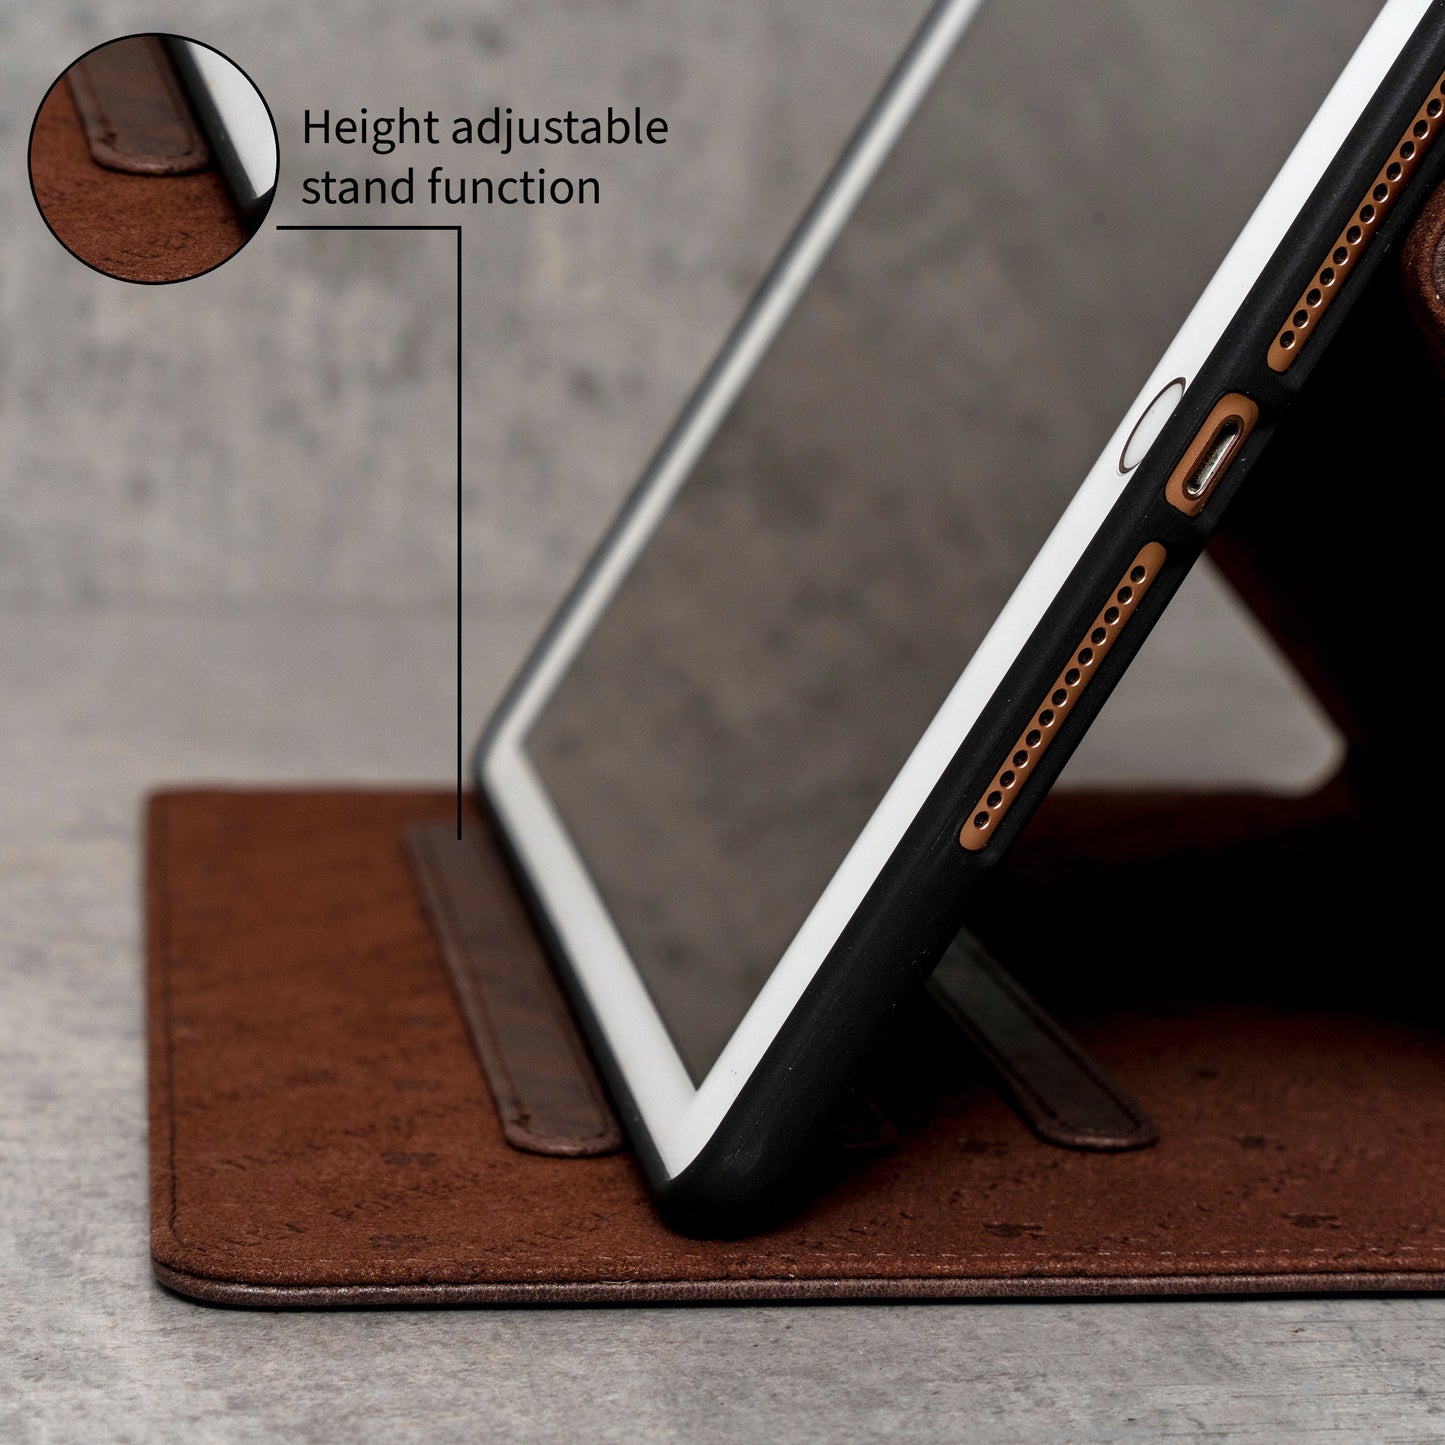 iPad Mini 4 Leather Case. Premium Slim Genuine Leather Stand Case/Cover/Wallet (Chocolate Brown)